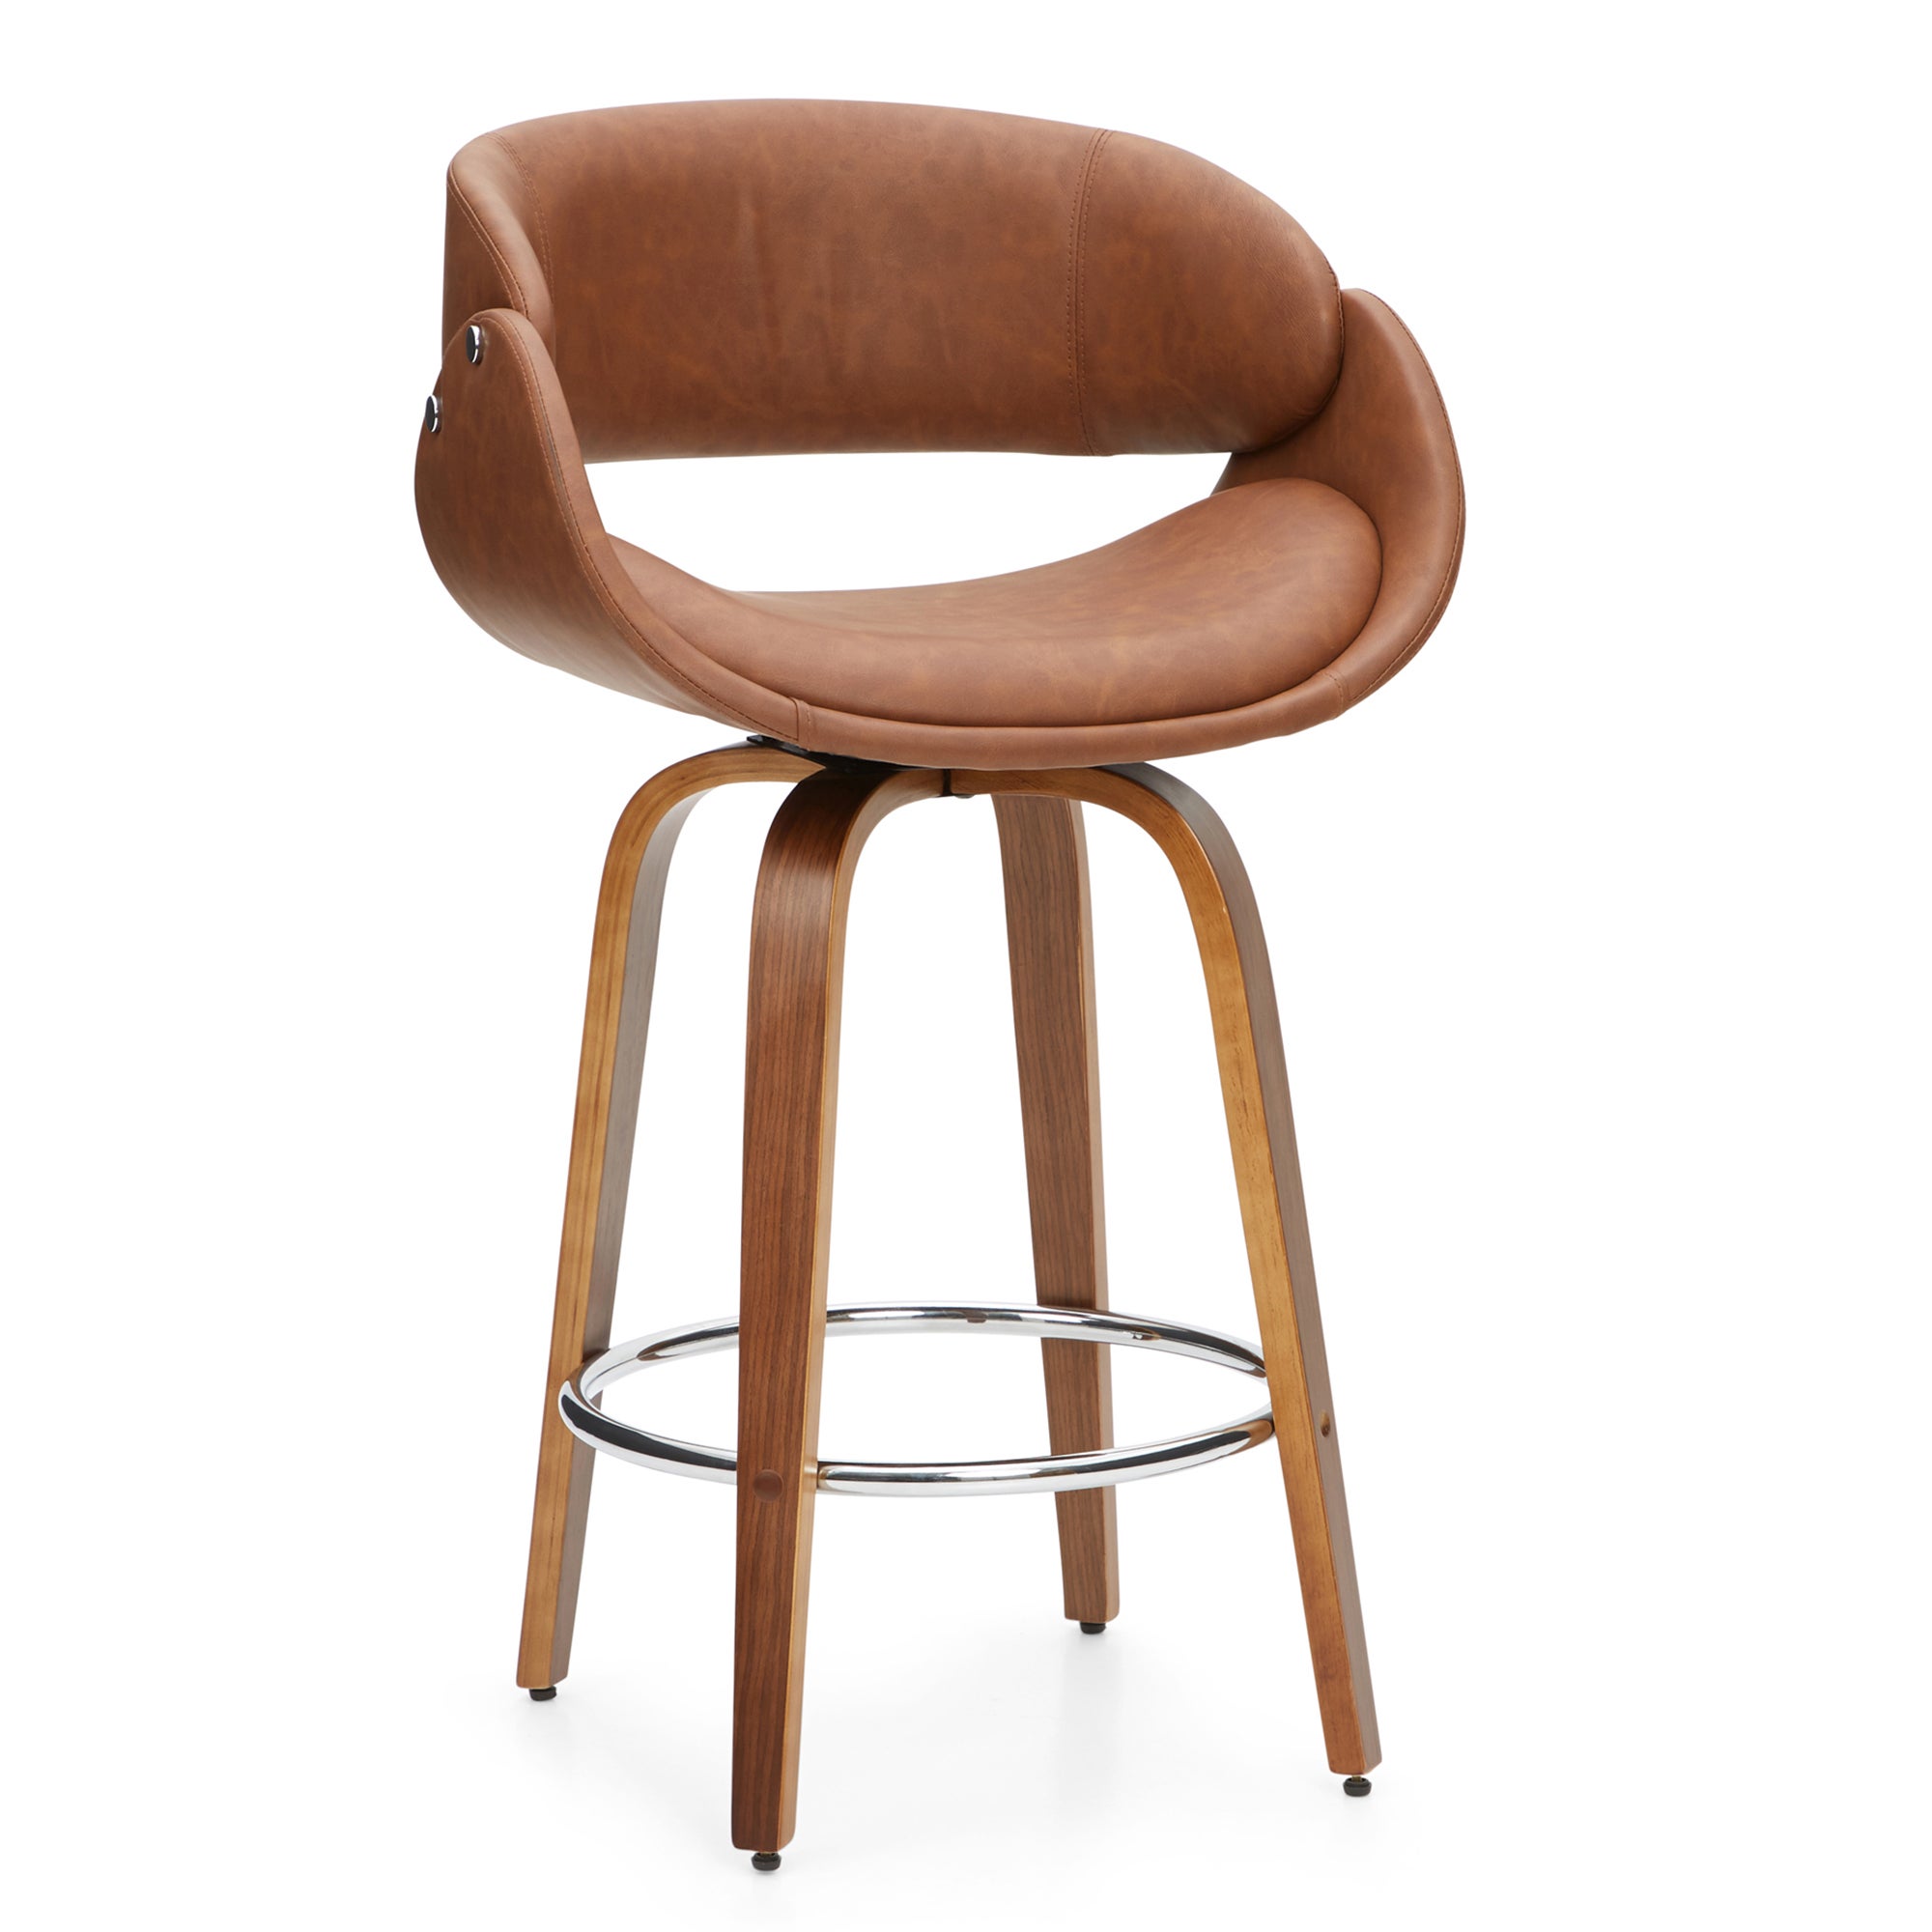 Torcello Bar Height Stool, Faux Leather Tan